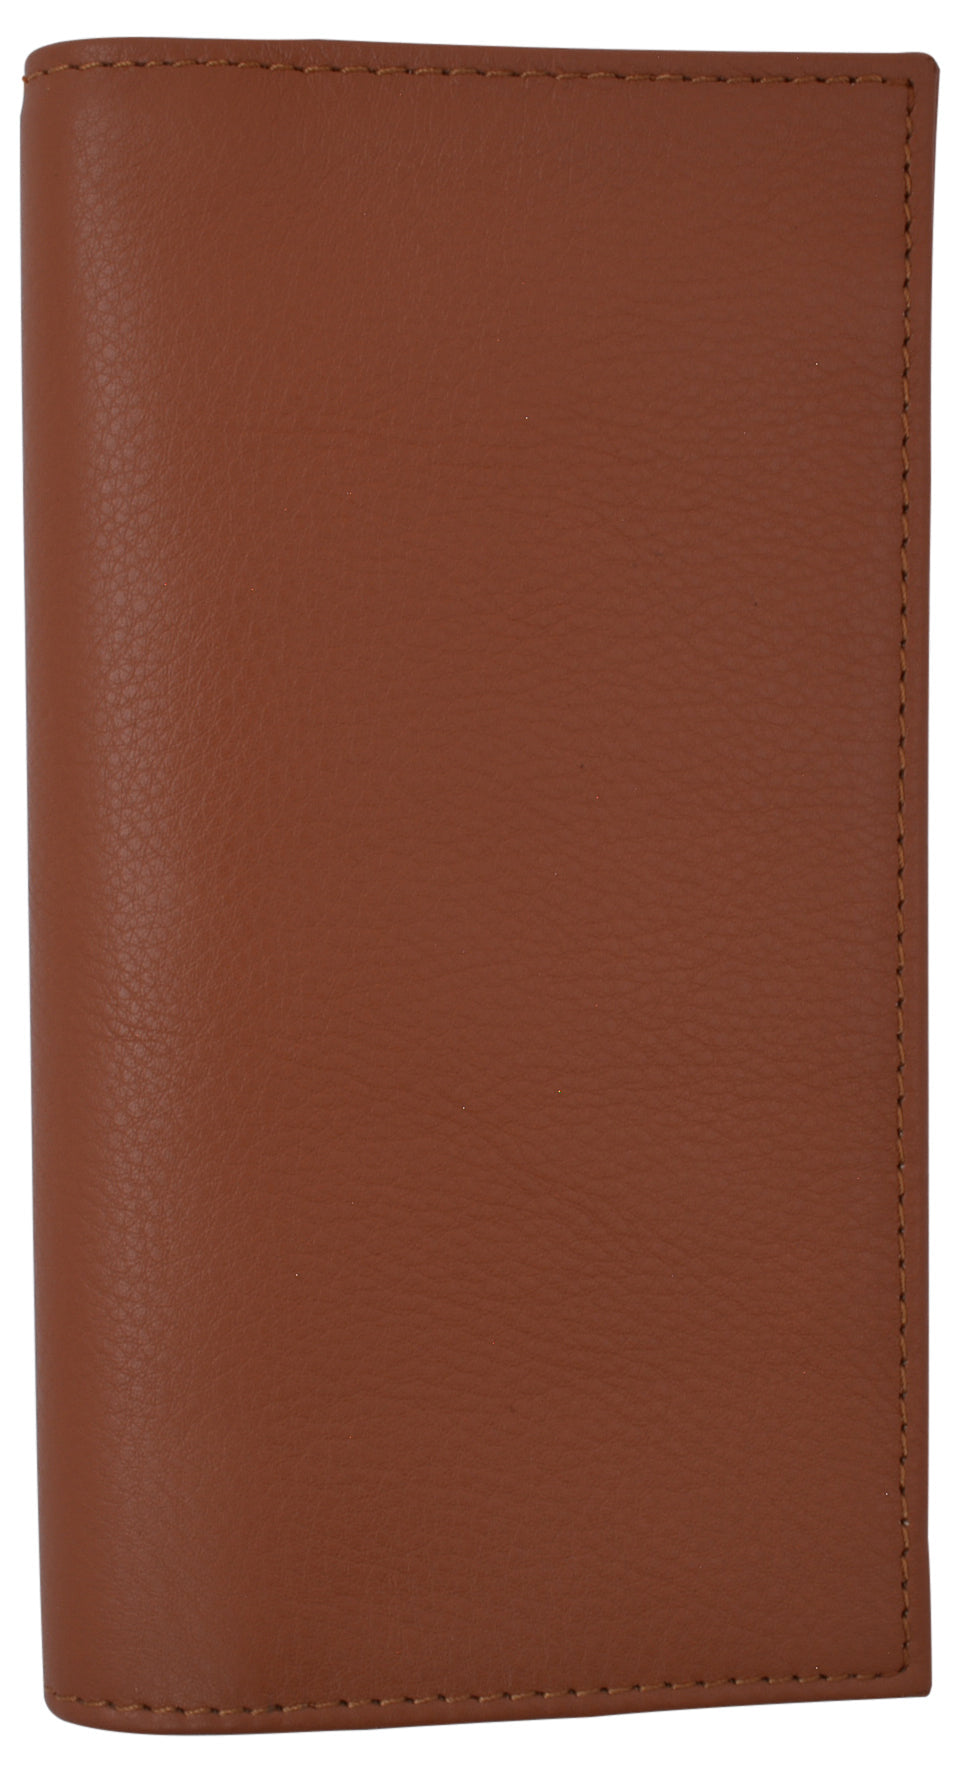 Basic Genuine Leather Checkbook Cover Colors Image 2